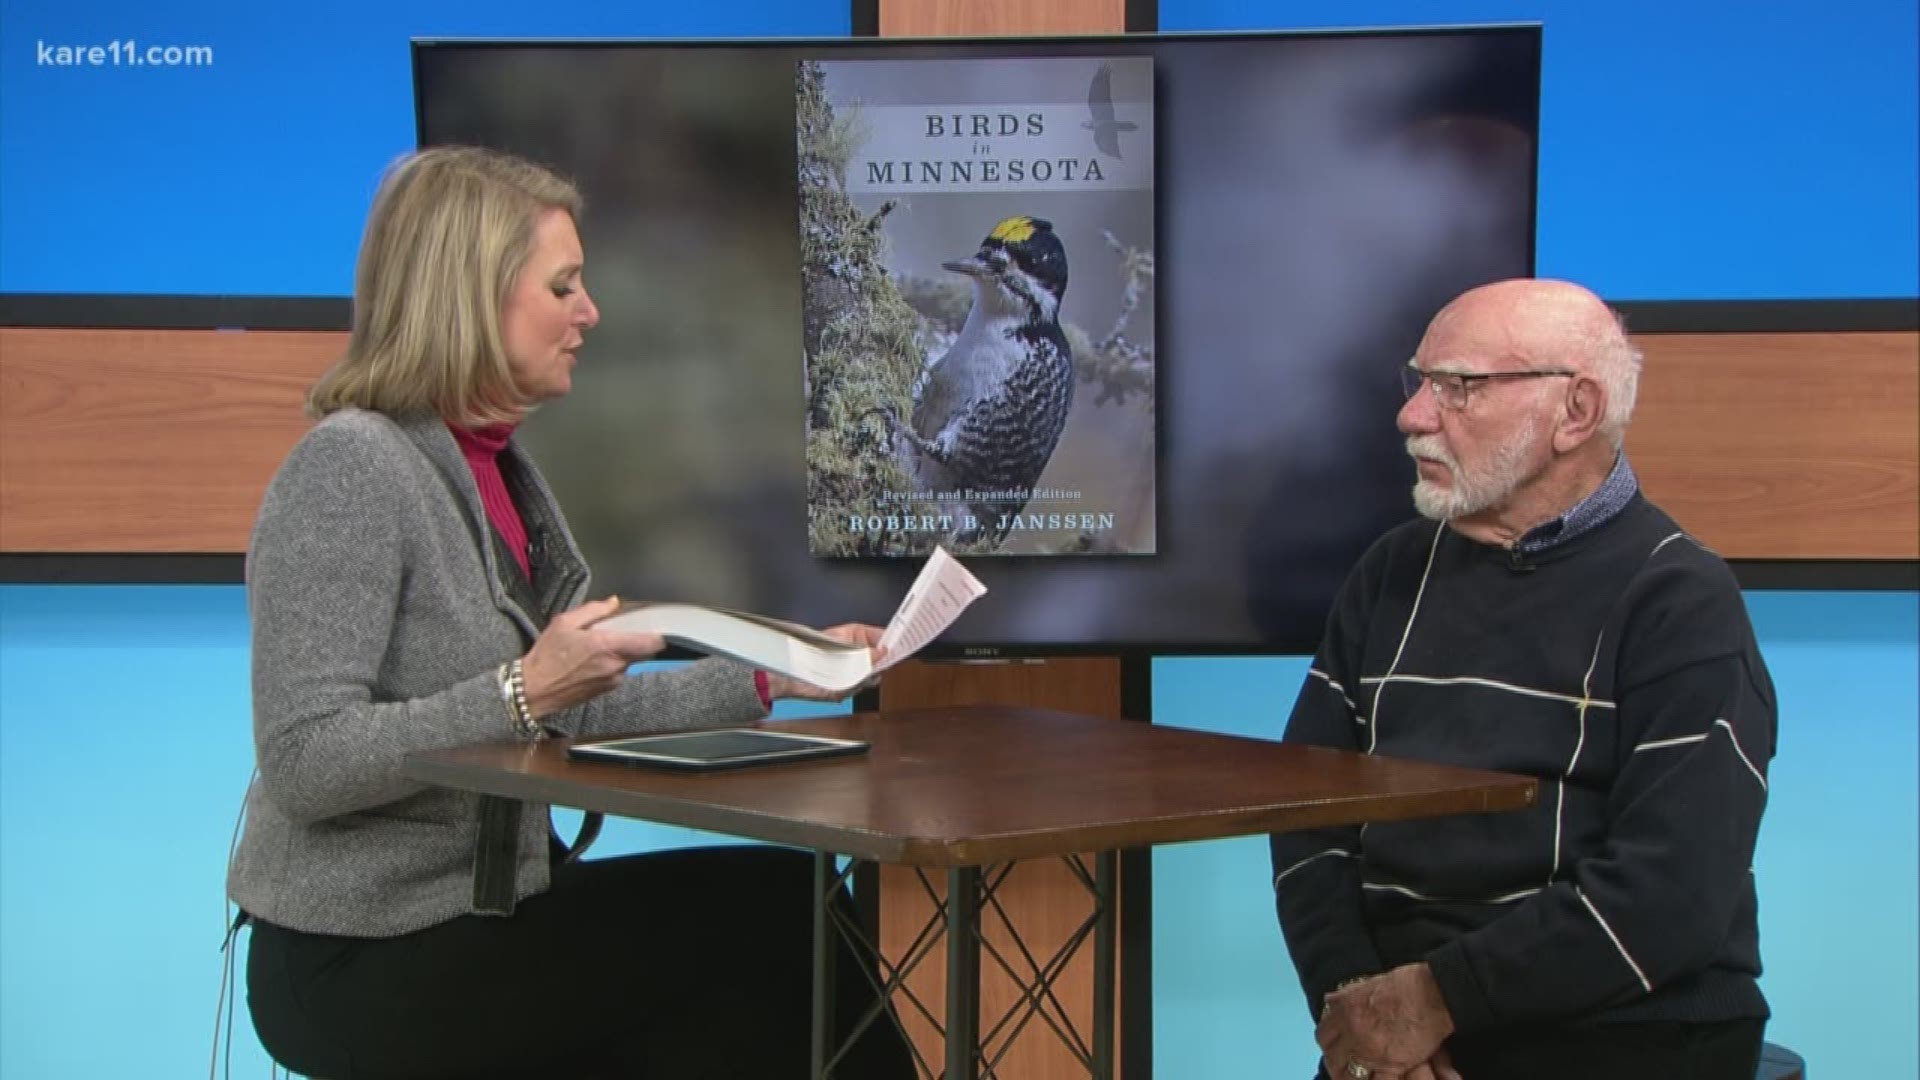 Author Robert Janssen says the book is an indispensable resource for birdwatchers in Minnesota, both for the passionate amateur and the professional.